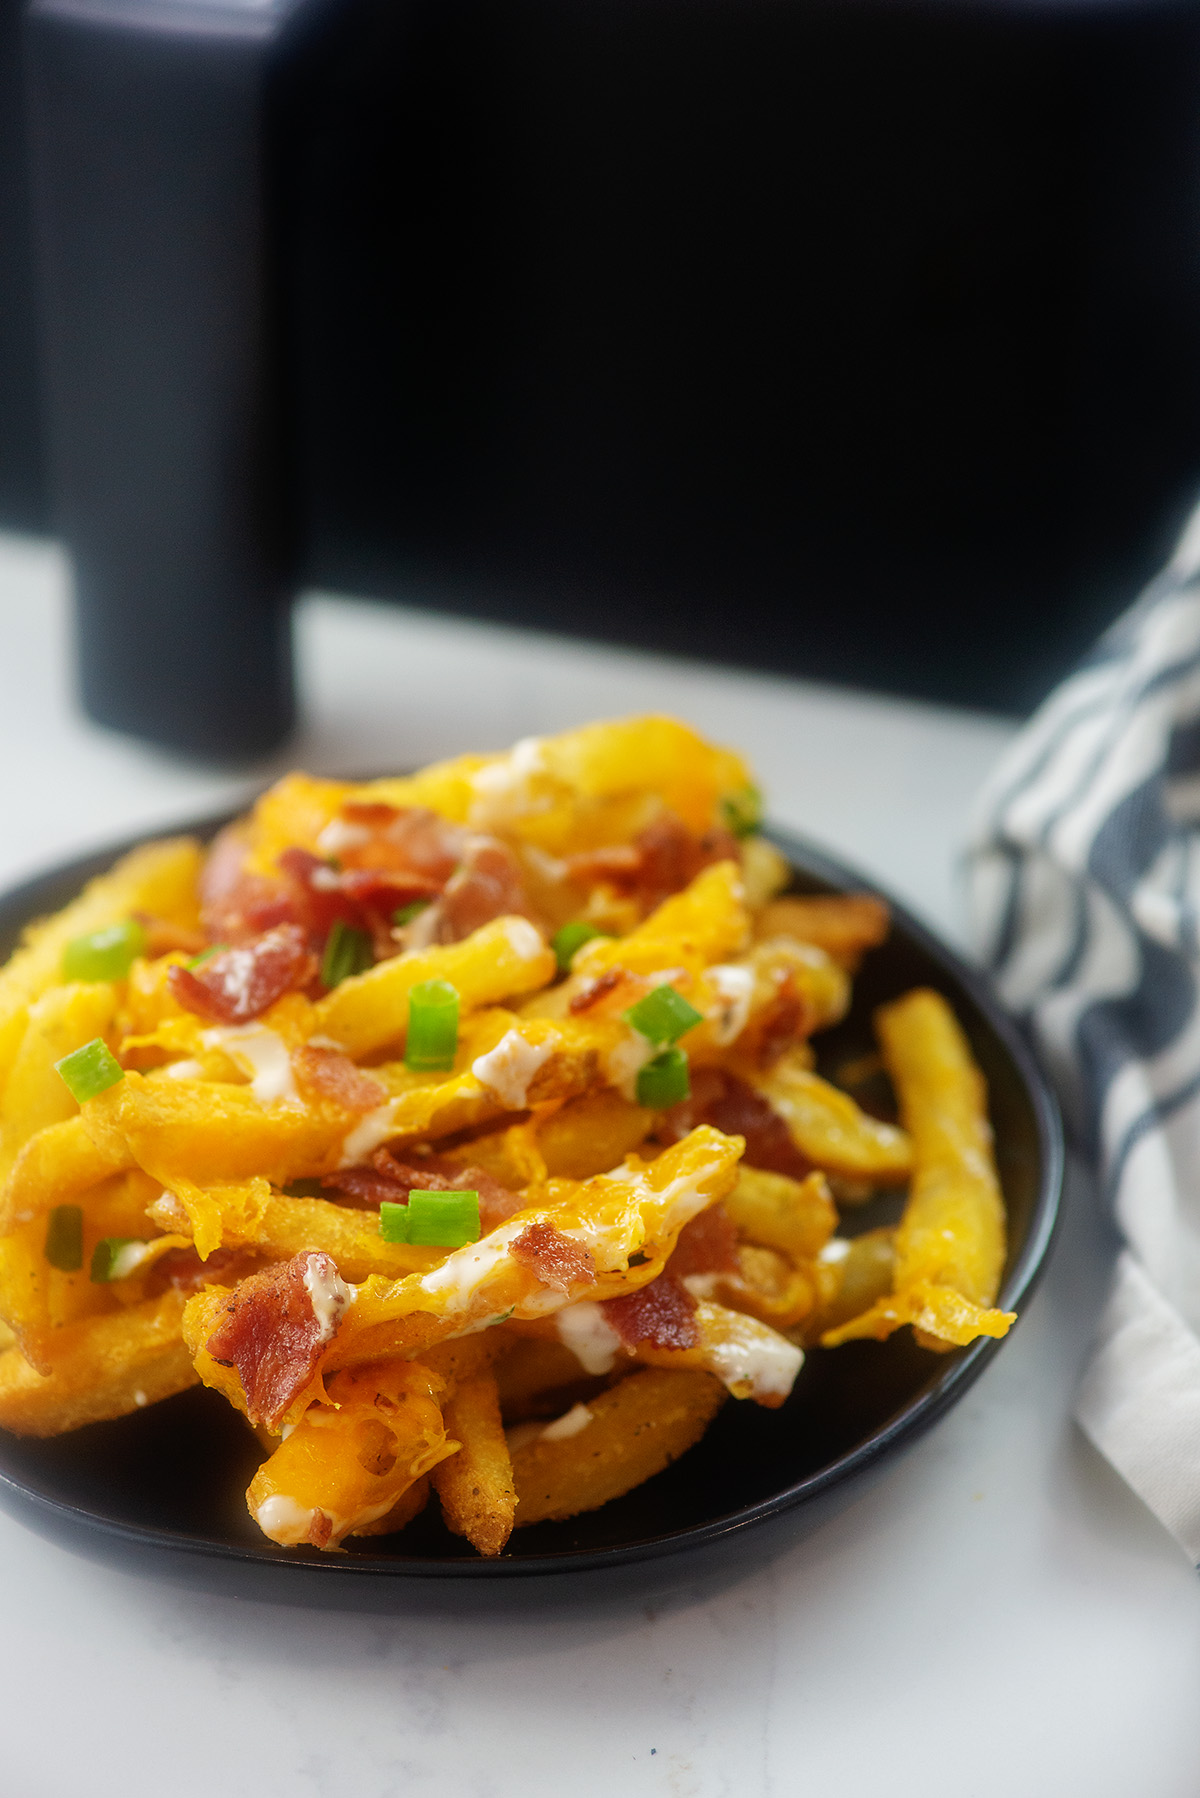 Loaded fries on a small black plate.